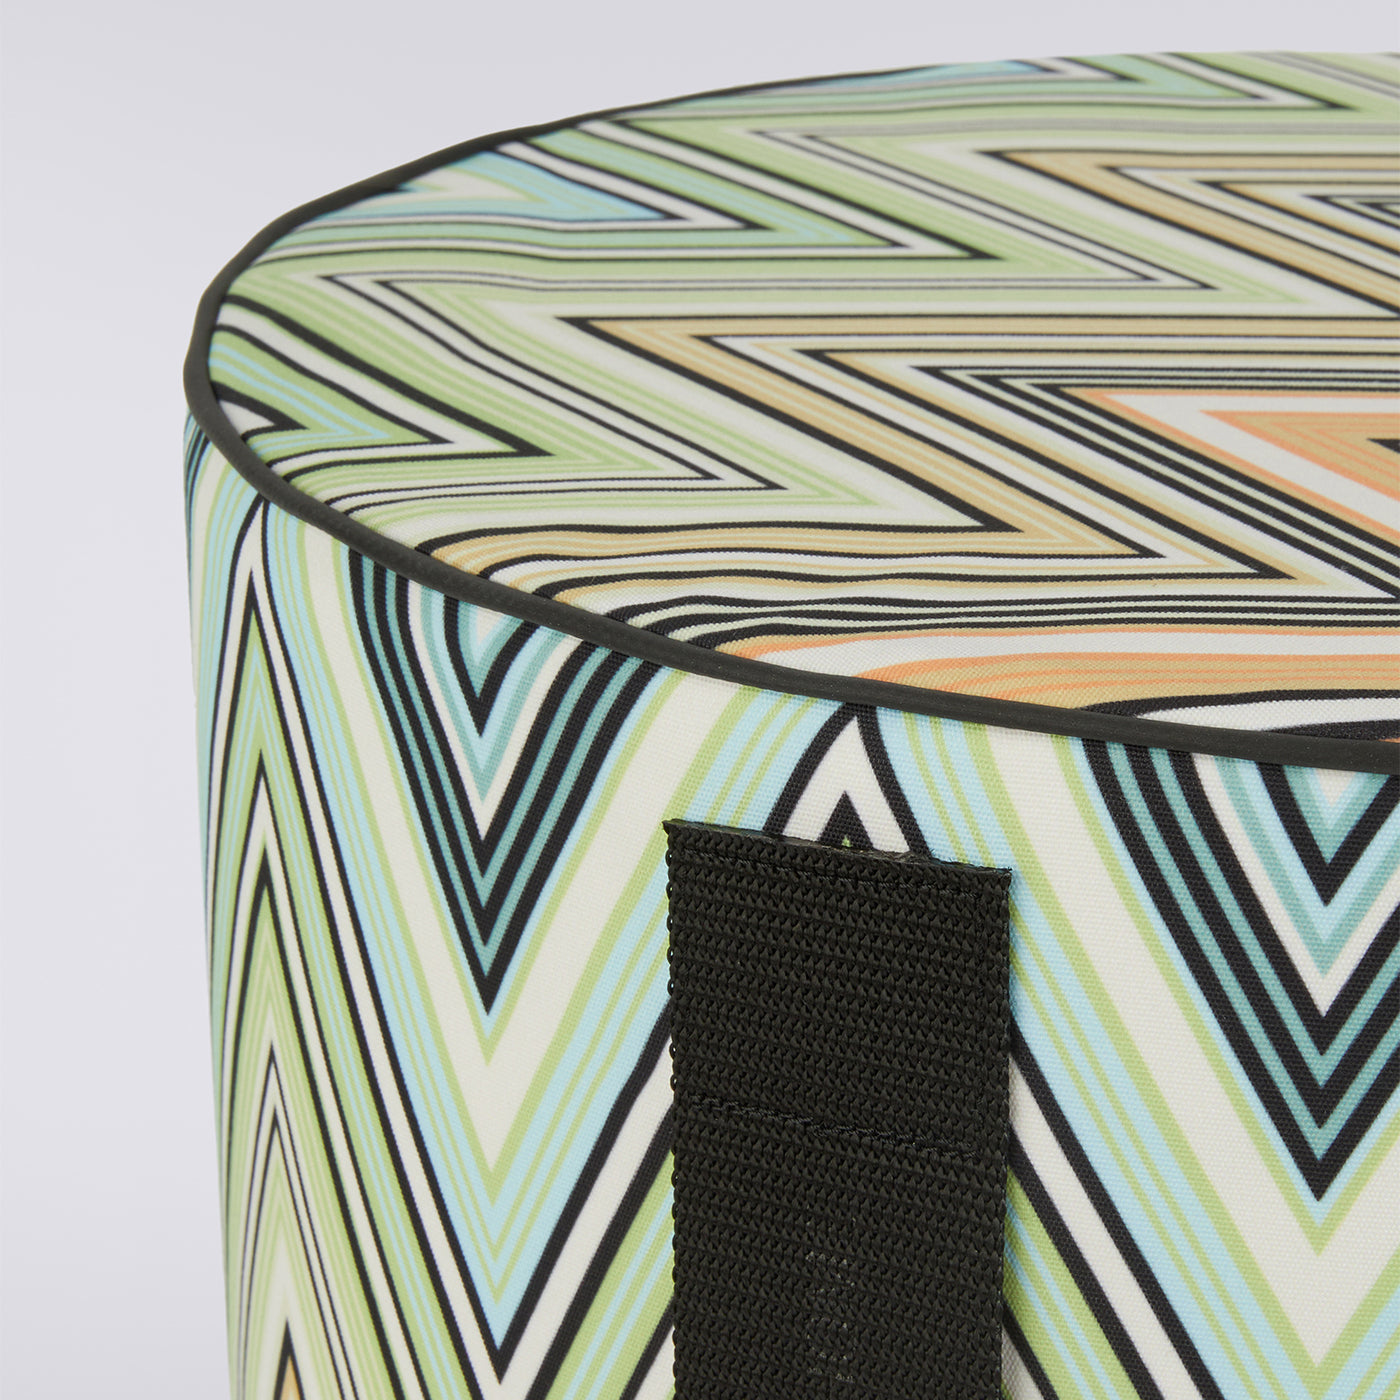 Kew Cylindrical Zigzag Pattern Outdoor Pouf #4 - Alternative view 1